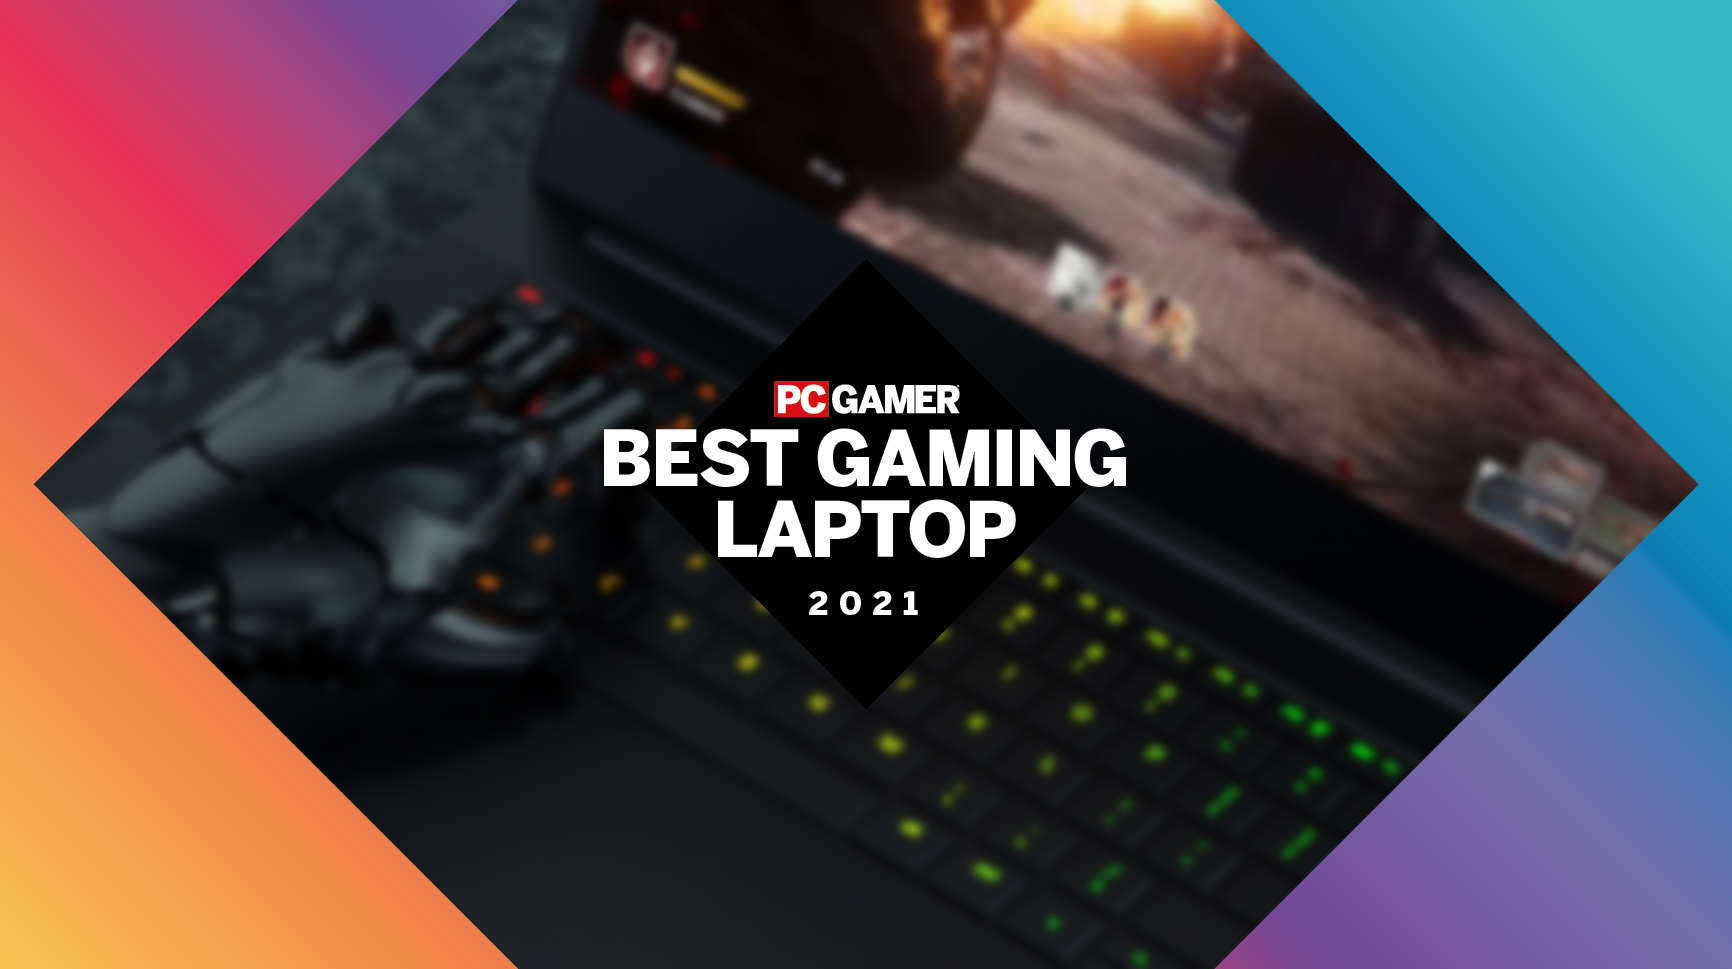 PC Gamer Hardware Awards: What Is The Best Gaming Laptop Of 2021? thumbnail